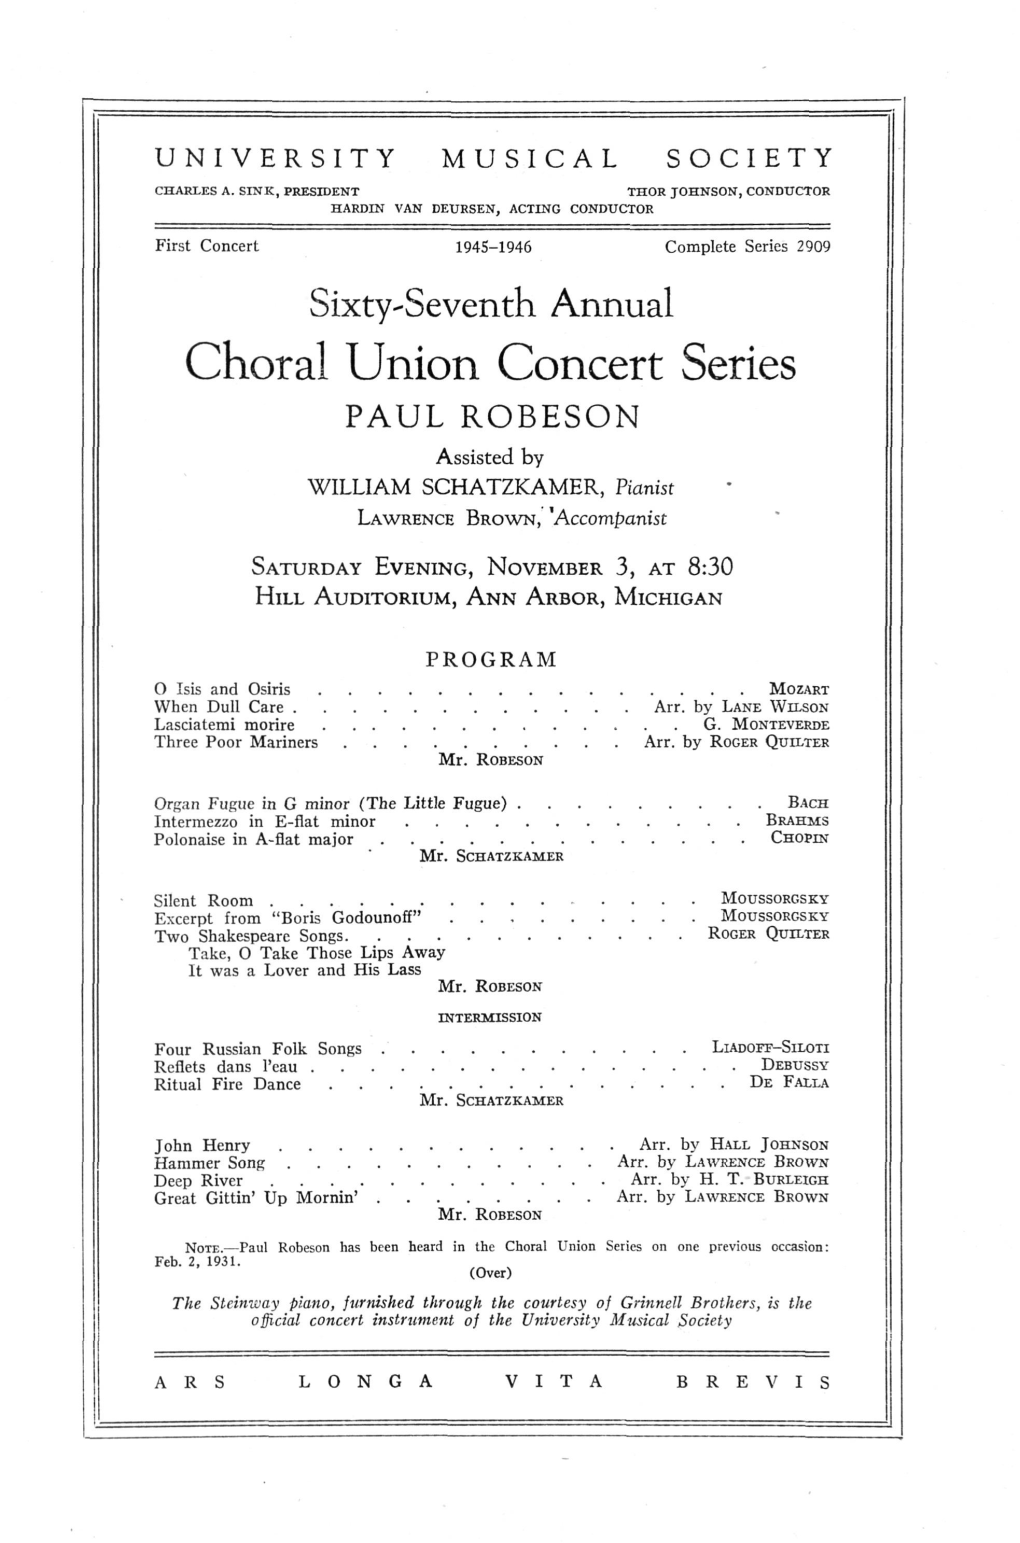 Choral Union Concert Series PAUL ROBESON Assisted by WILLIAM SCHATZKAMER, Pianist LAWRENCE BROWN, 'Accompanist